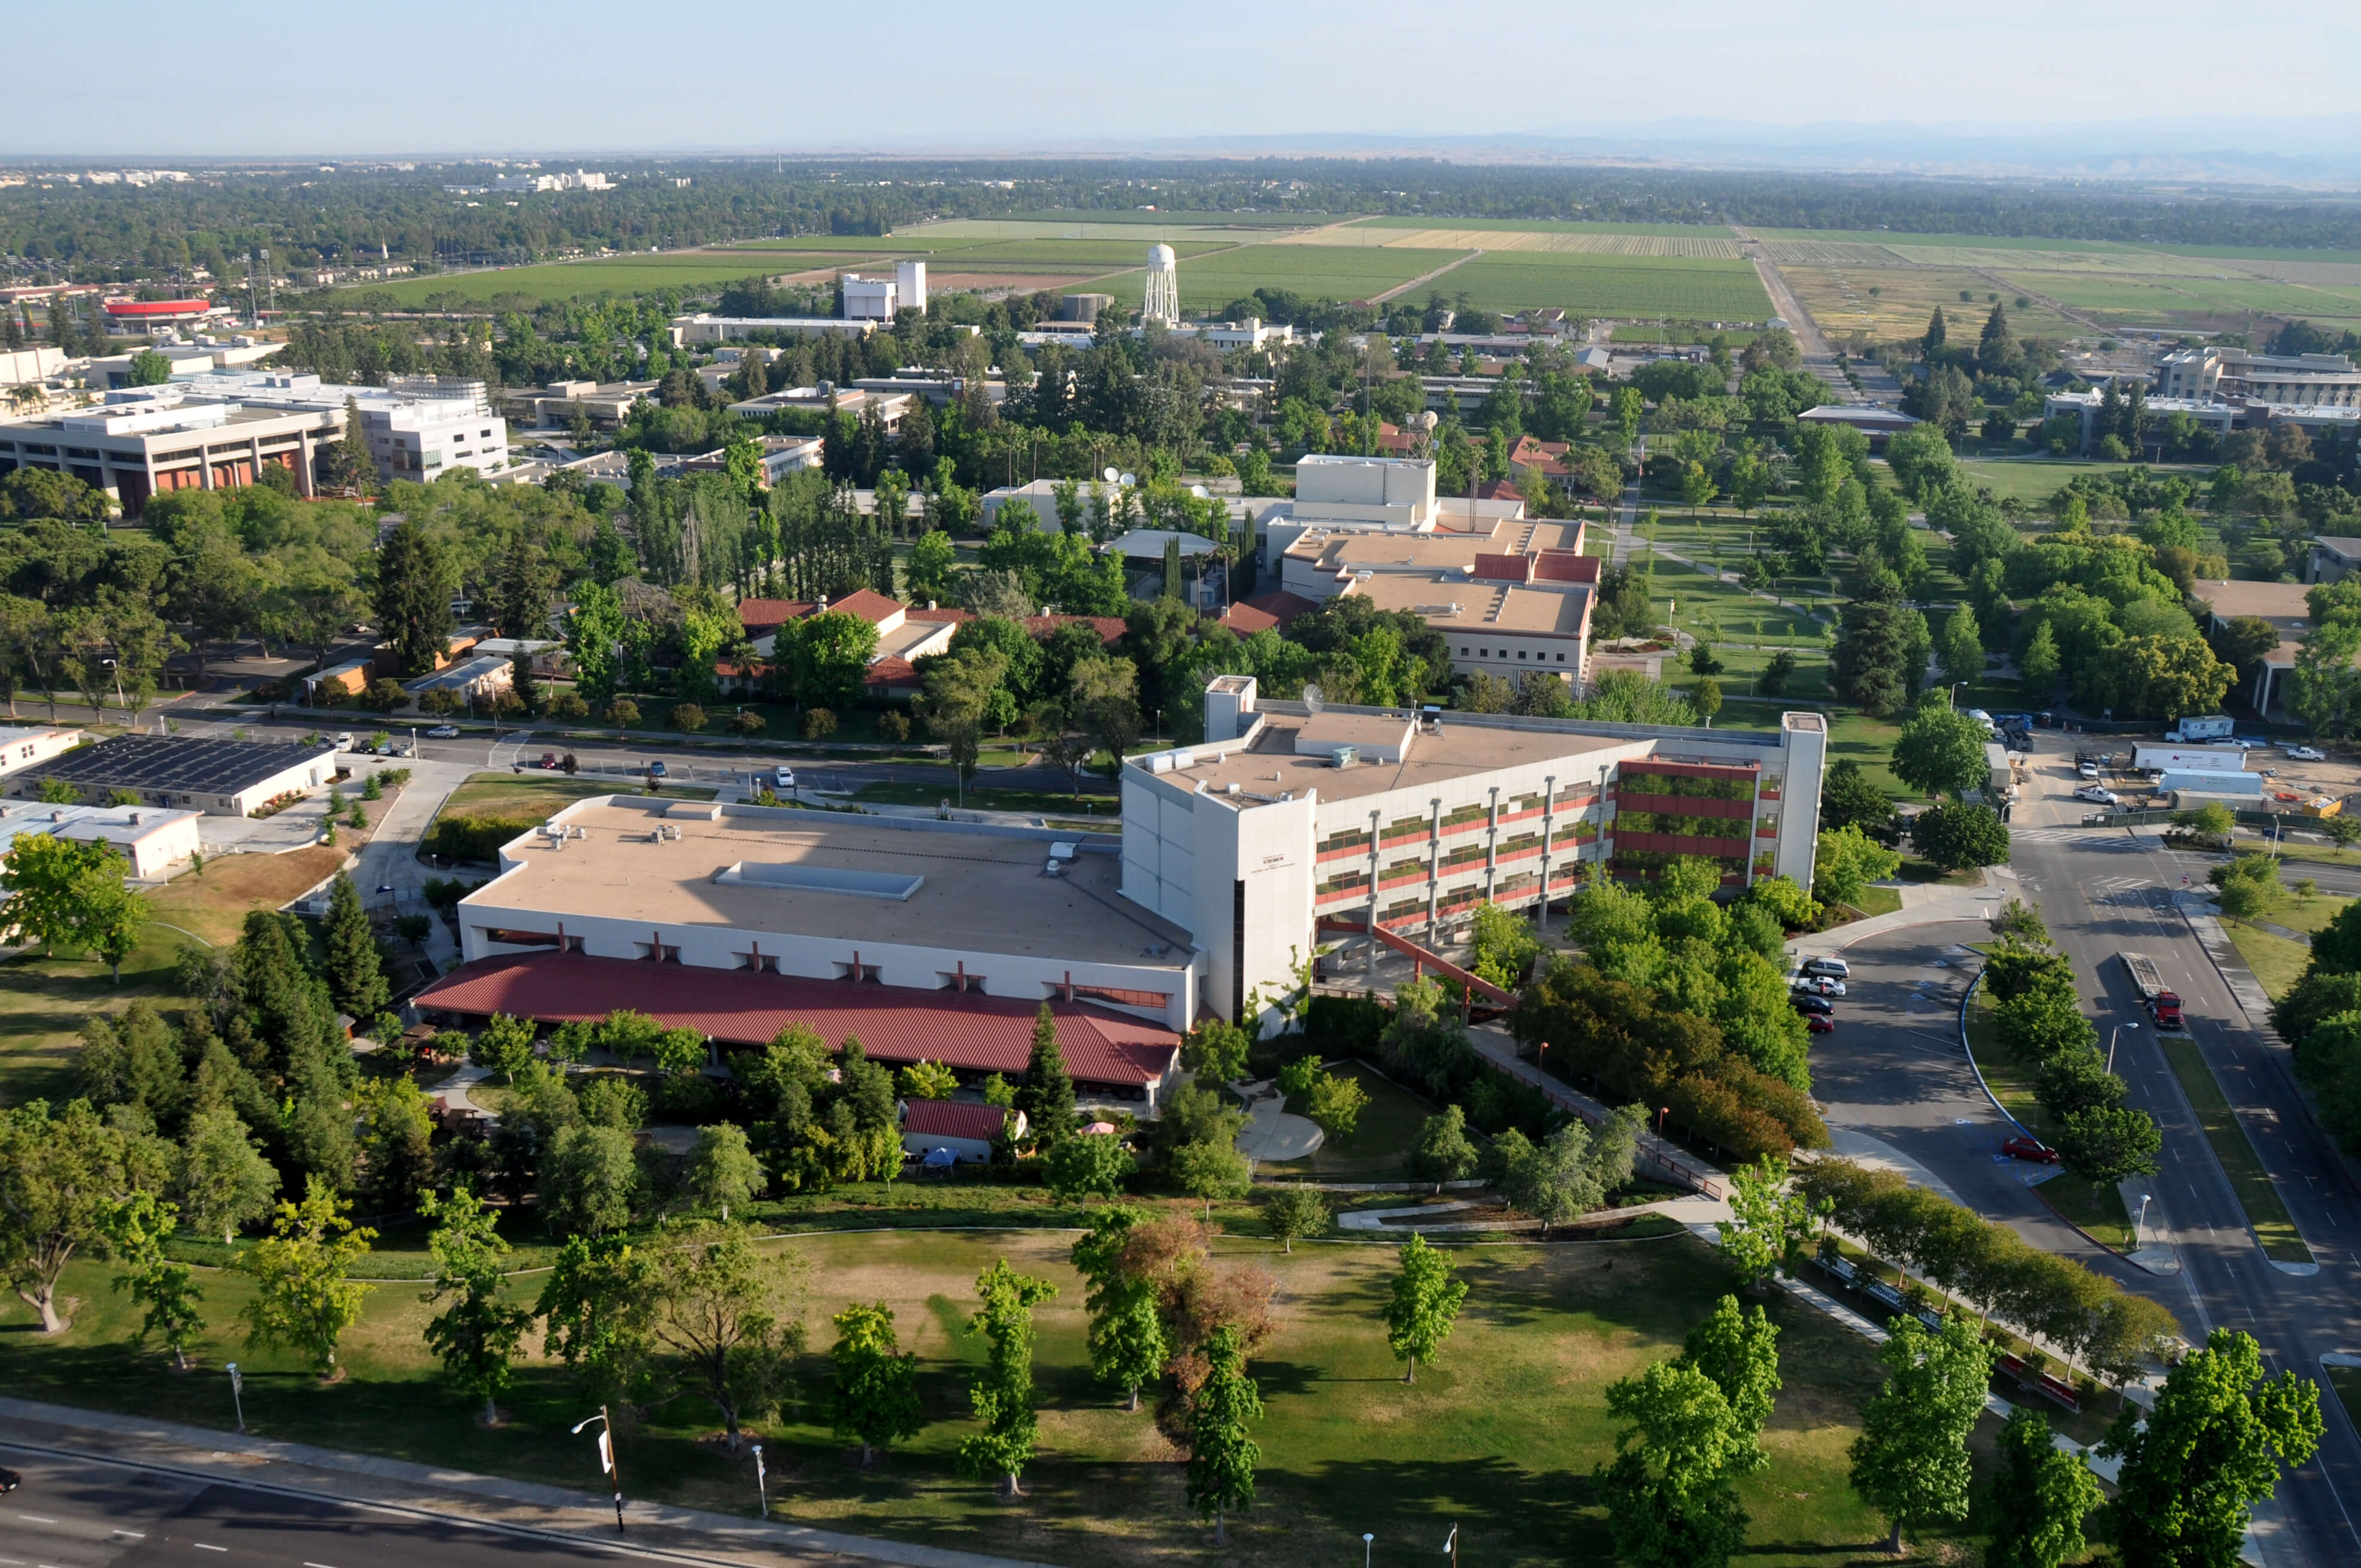 Aerial view of the Fresno State campus